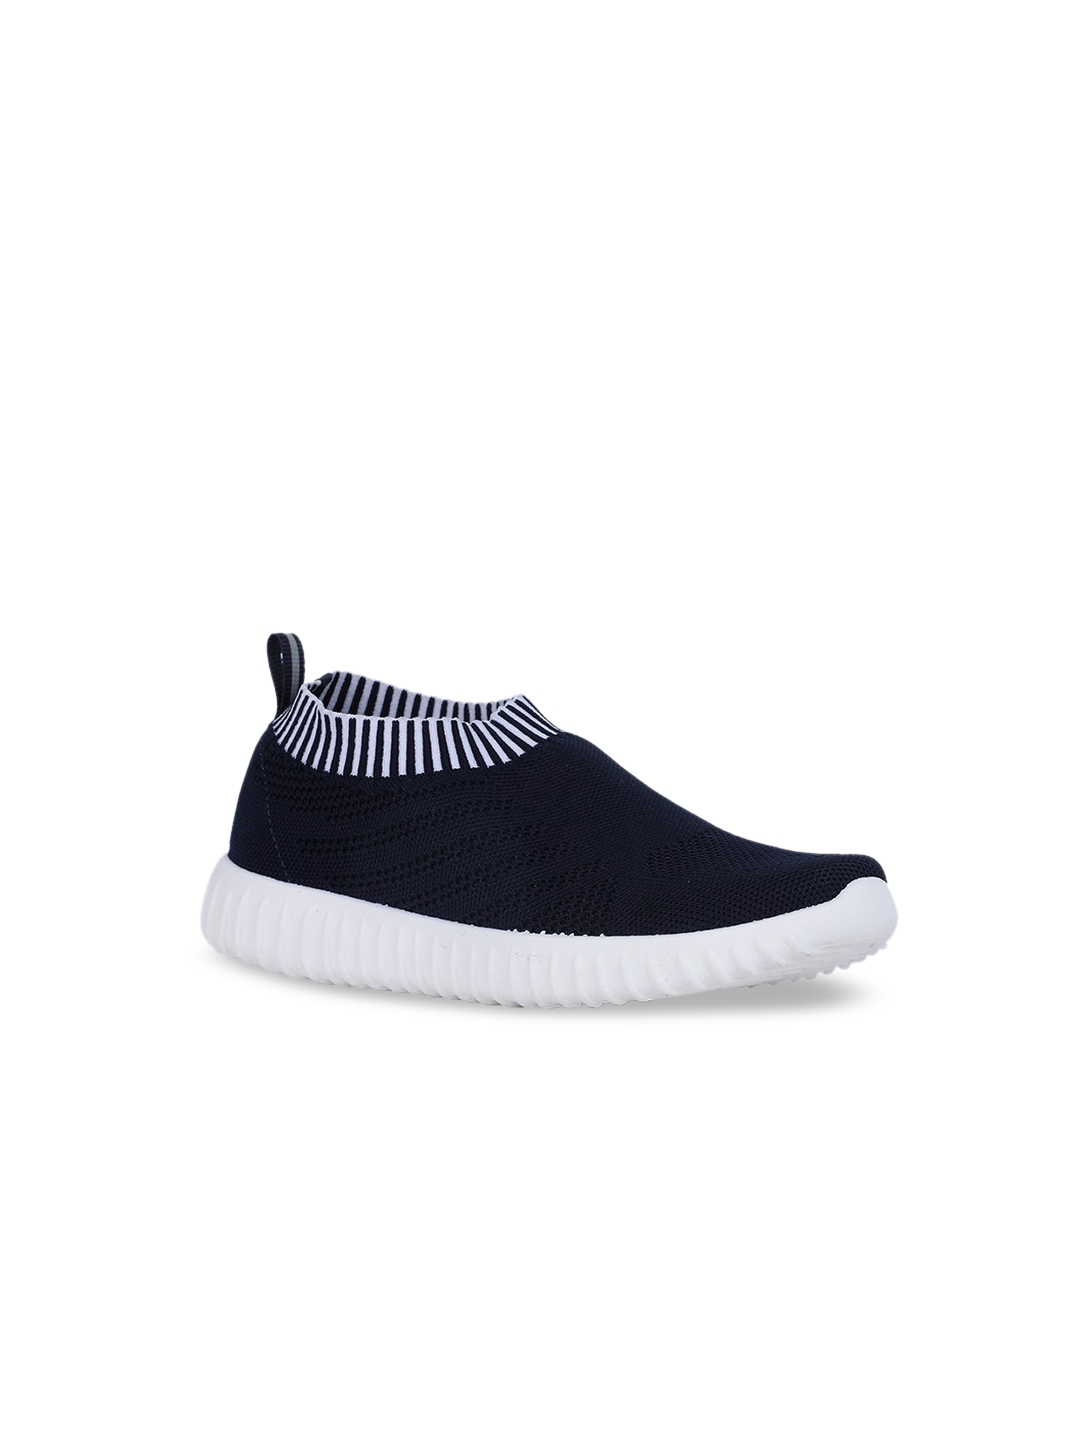 Buy Bata Girls Navy Blue Slip On Sneakers - Casual Shoes for Girls ...